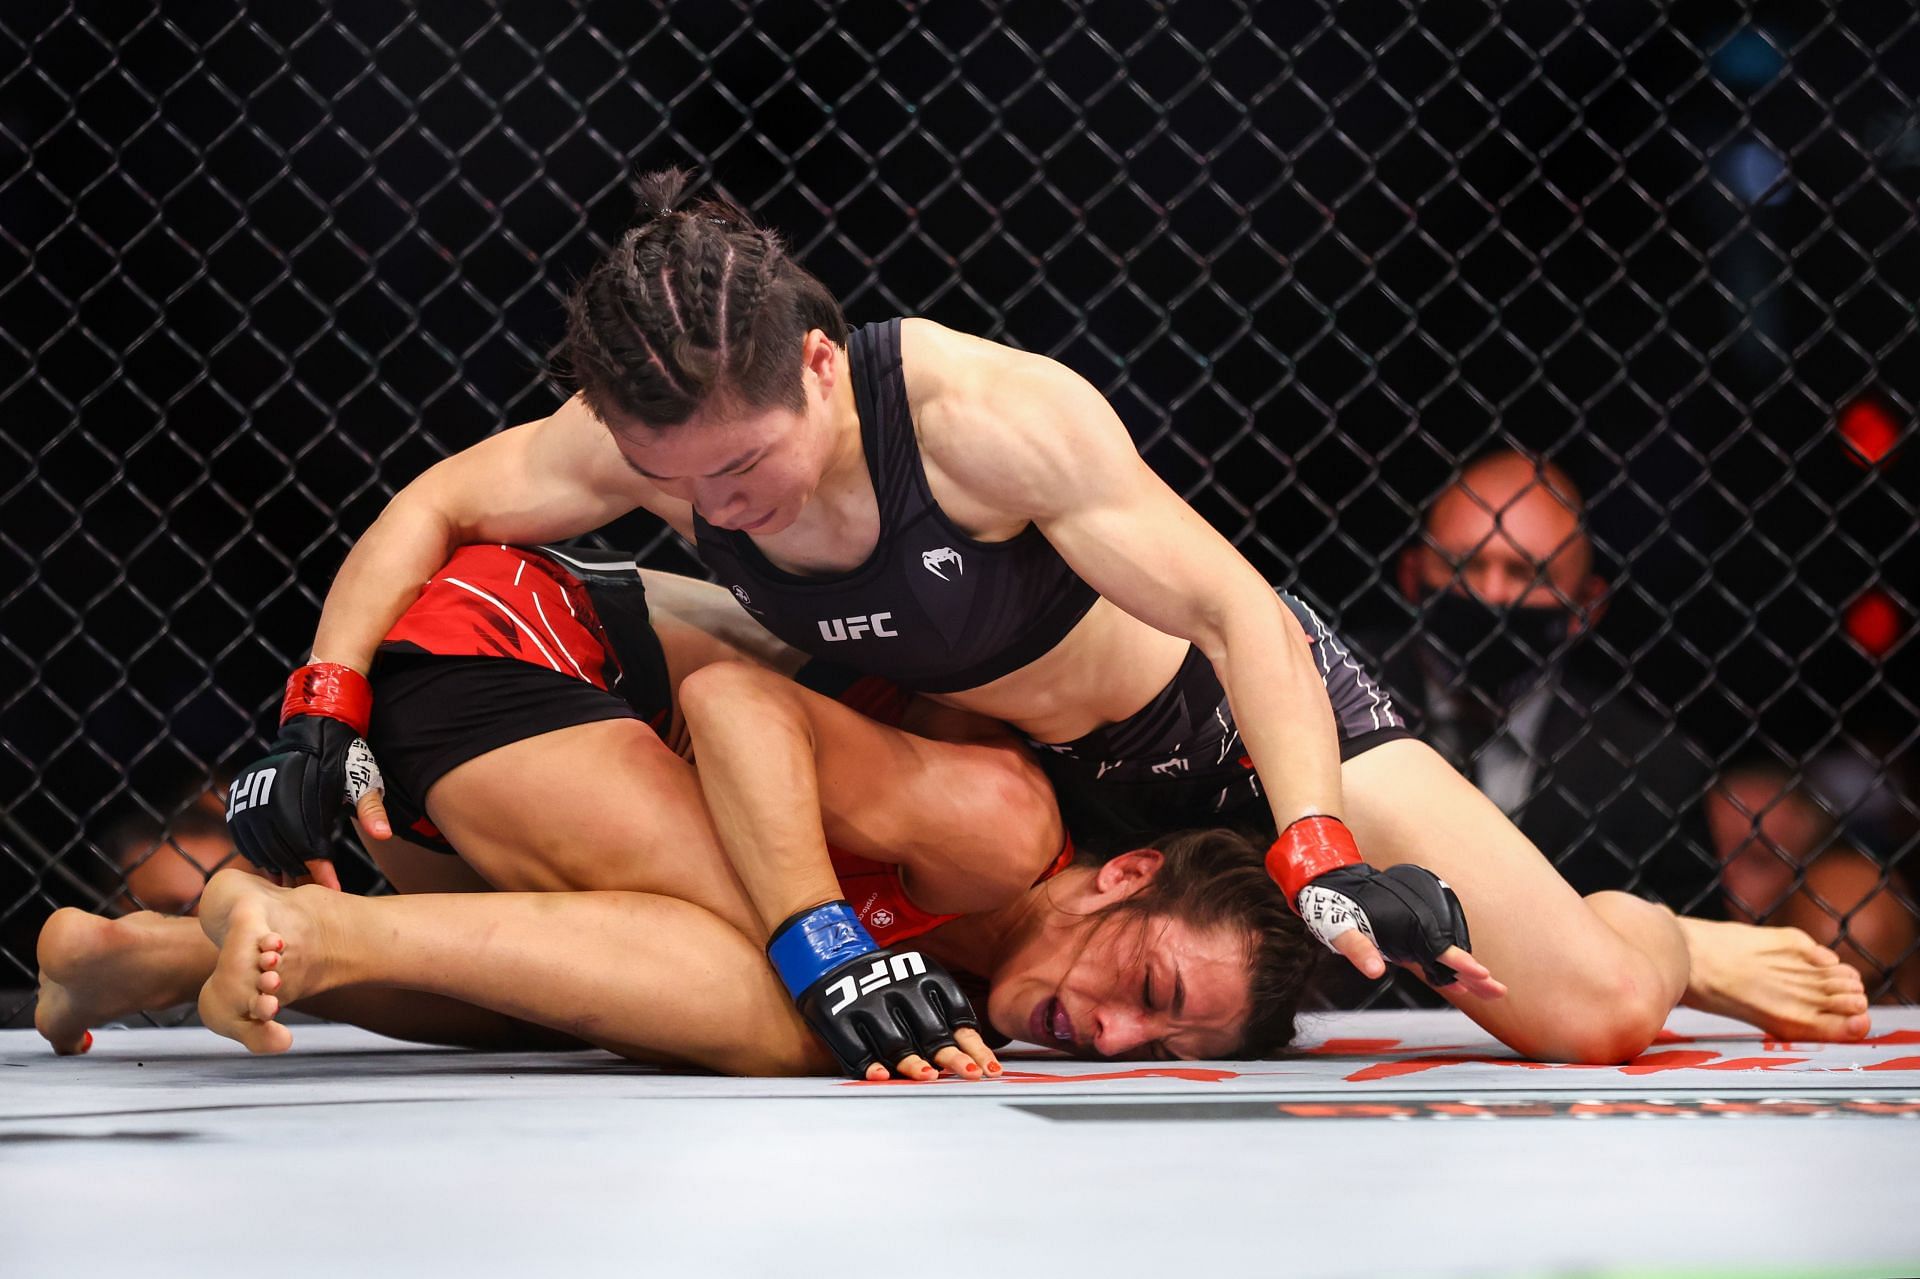 Weili Zhang settled the score against Joanna Jedrzejczyk with a spinning backfist